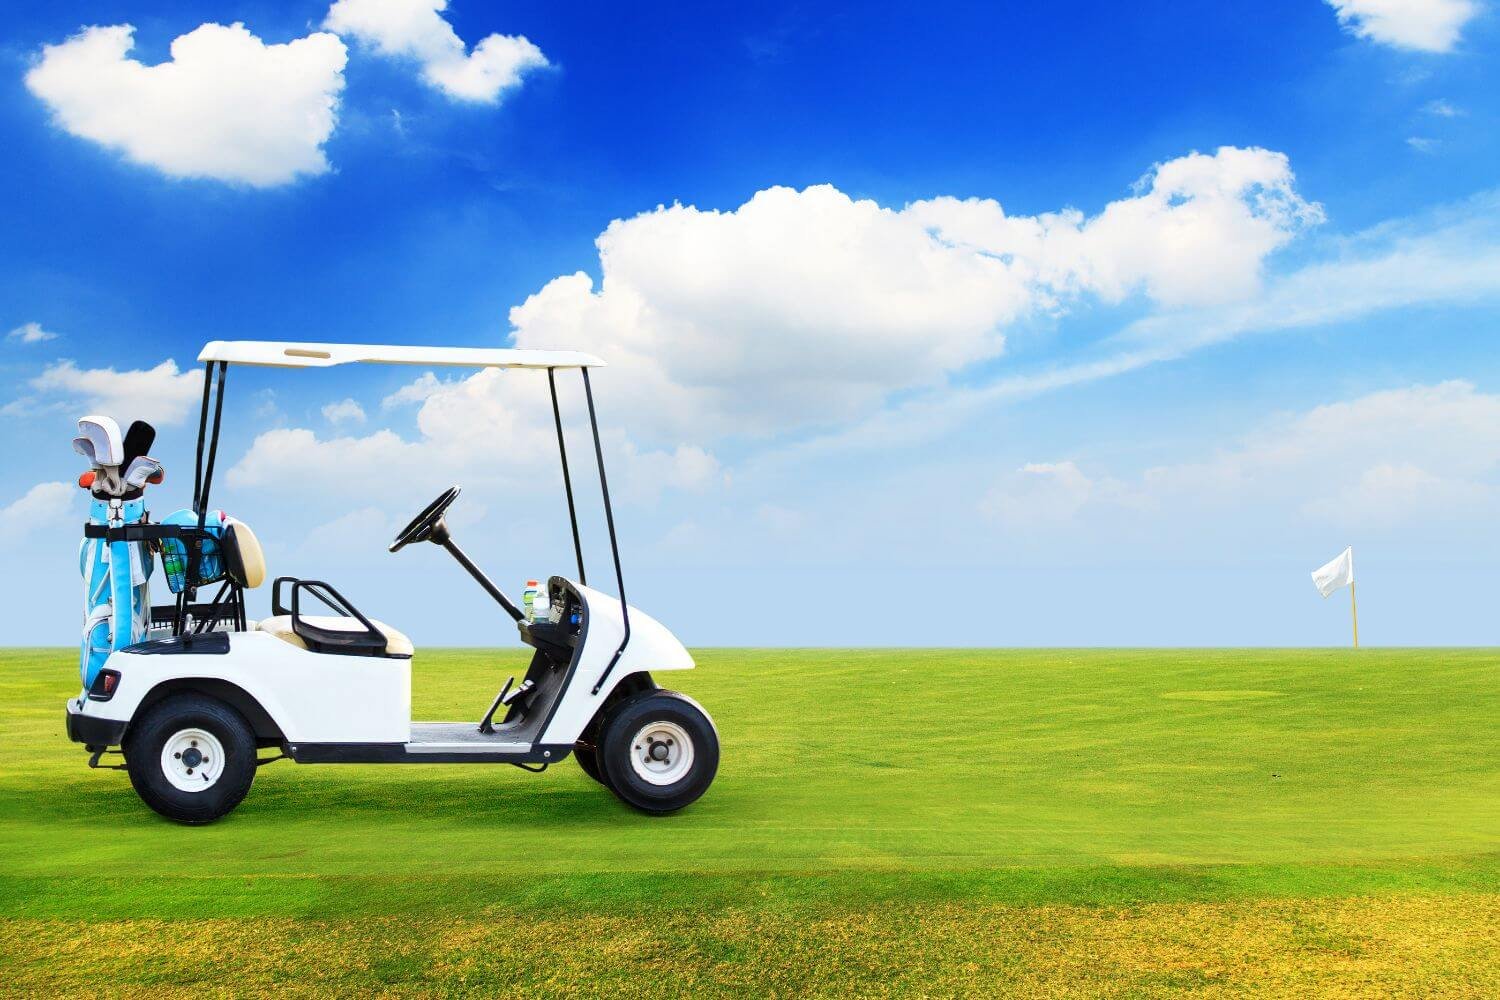 golf cart on golf course with blue sky and clounds